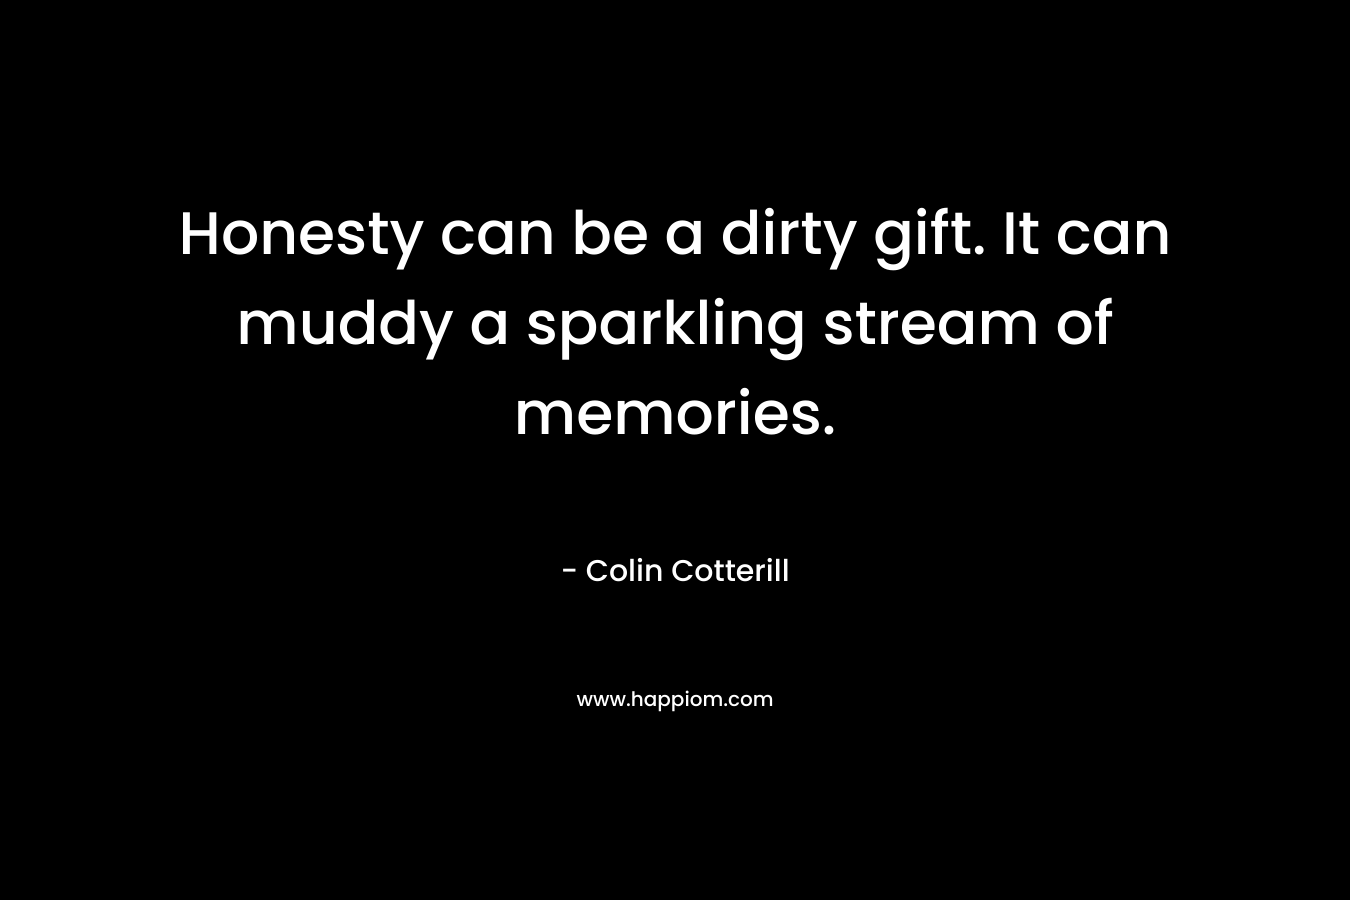 Honesty can be a dirty gift. It can muddy a sparkling stream of memories.